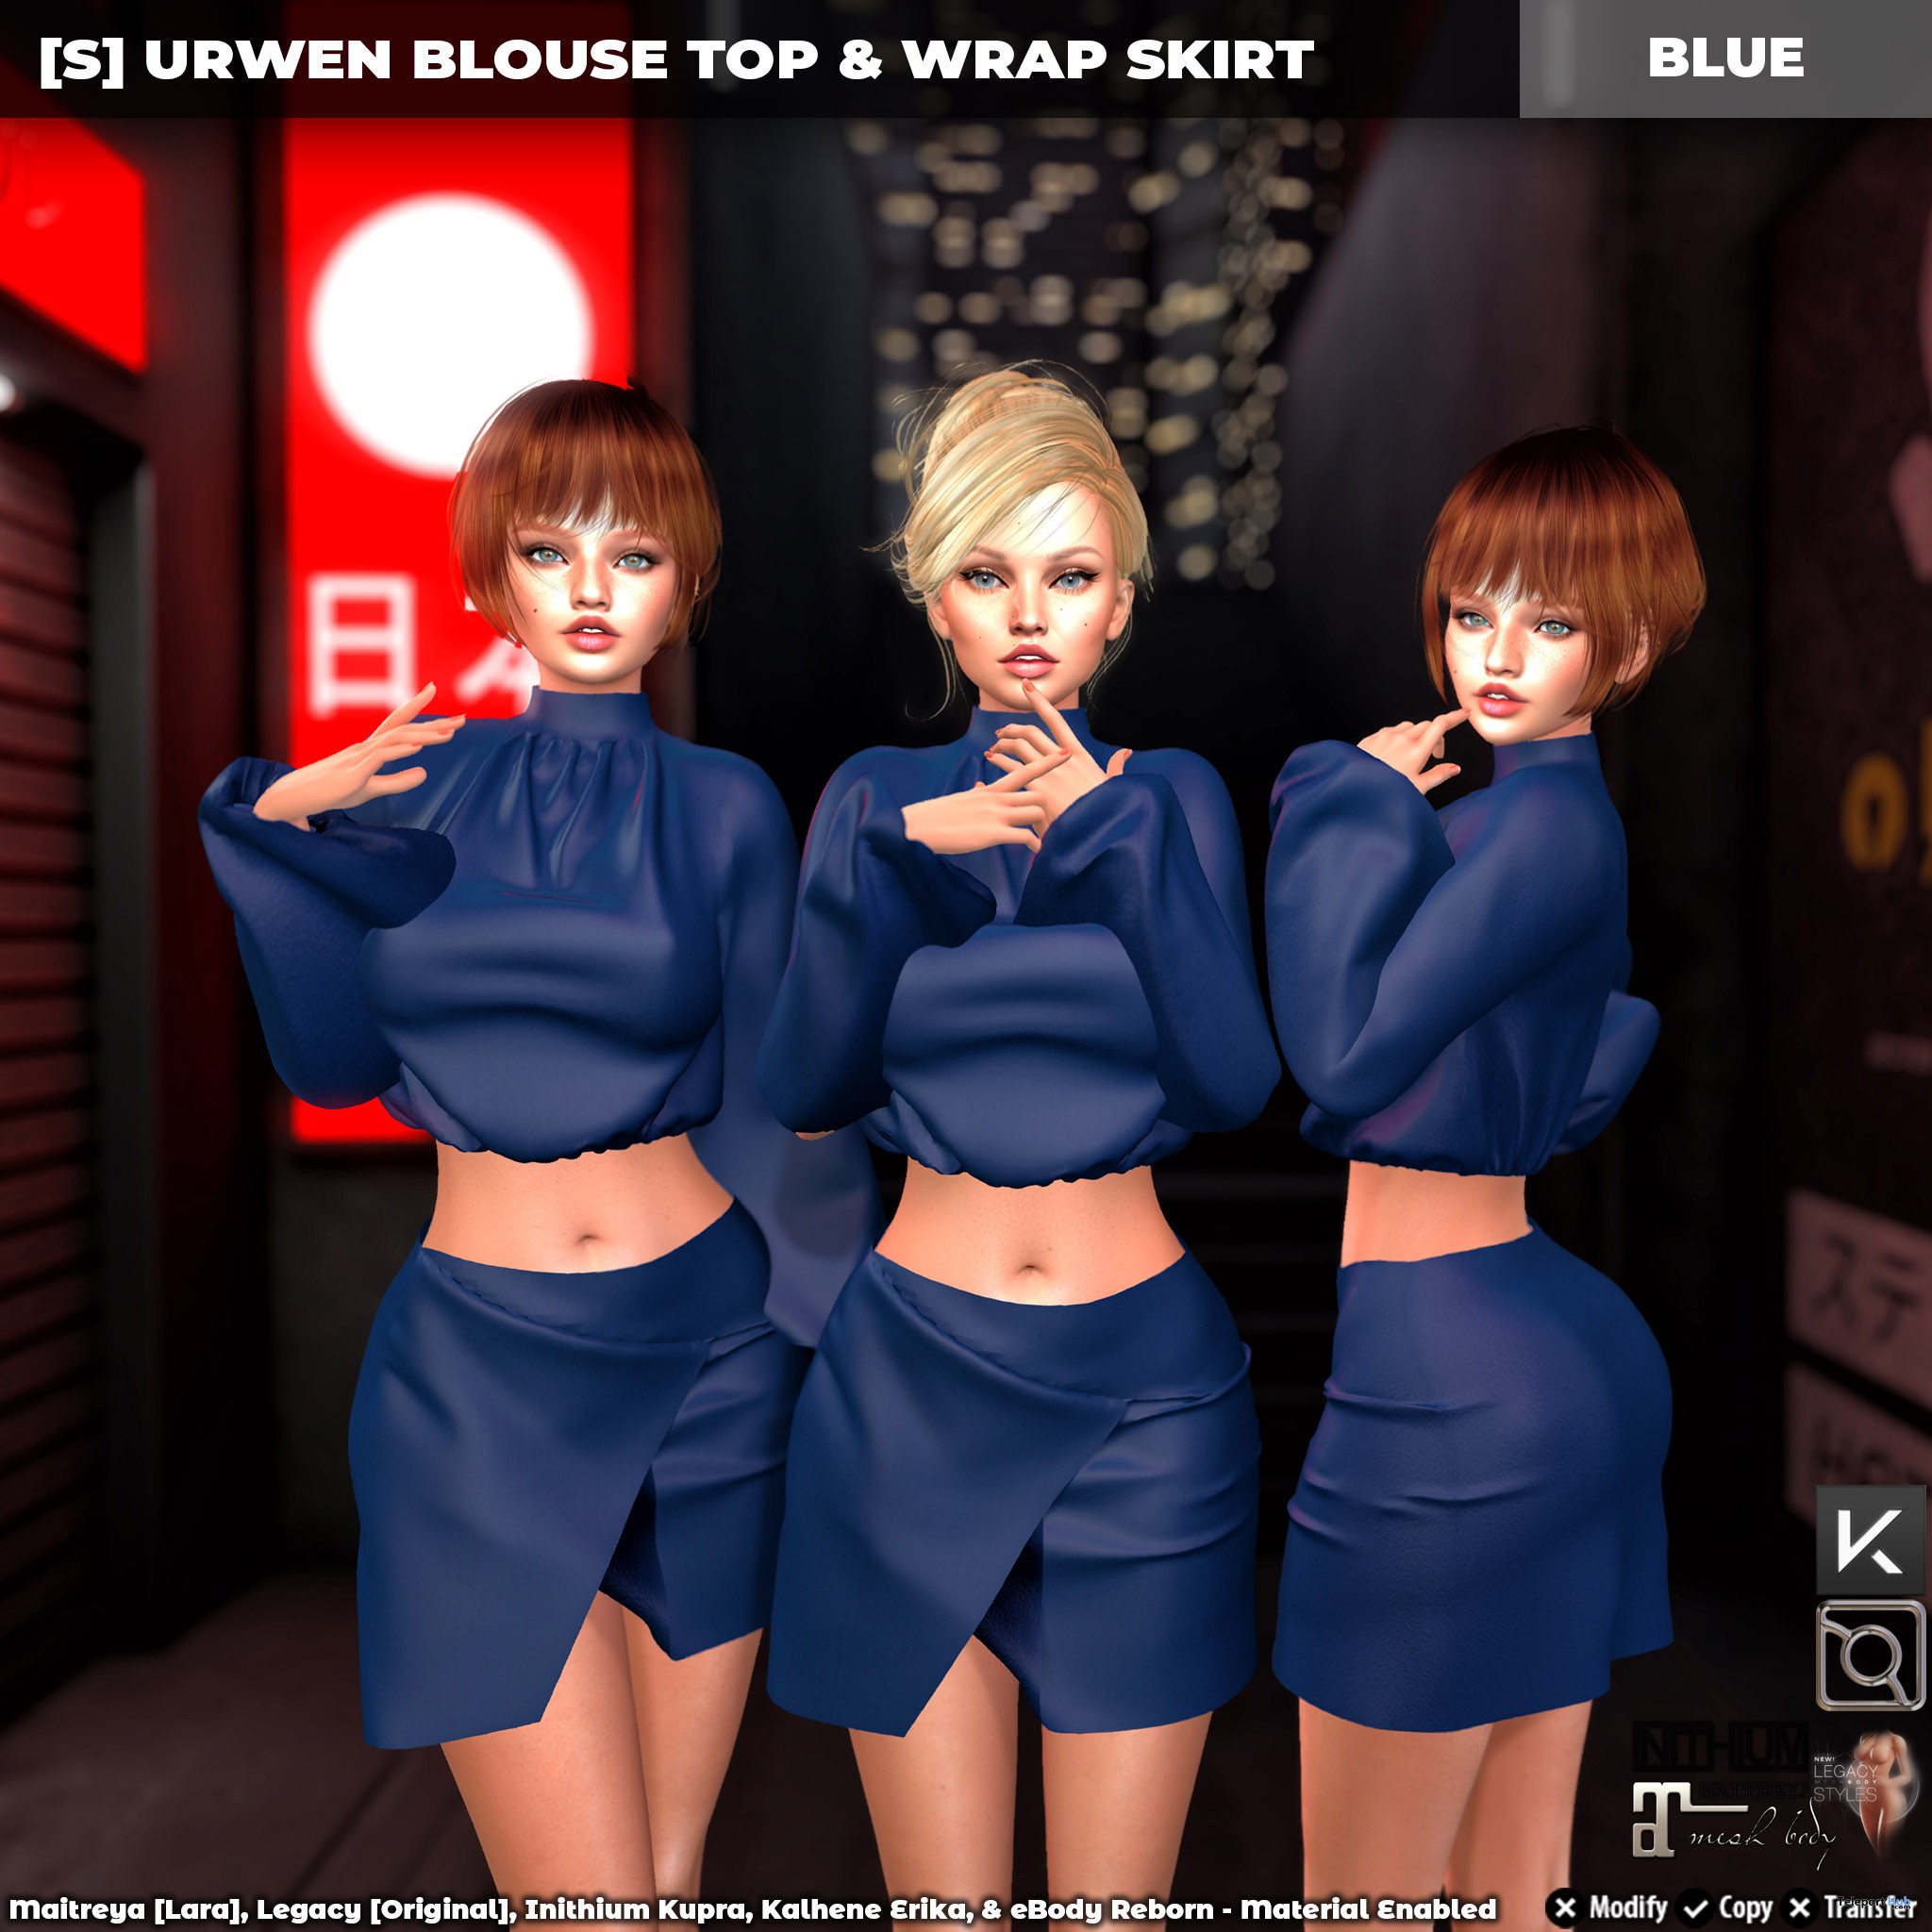 New Release: [S] Urwen Blouse Top & Wrap Skirt by [satus Inc] - Teleport Hub - teleporthub.com